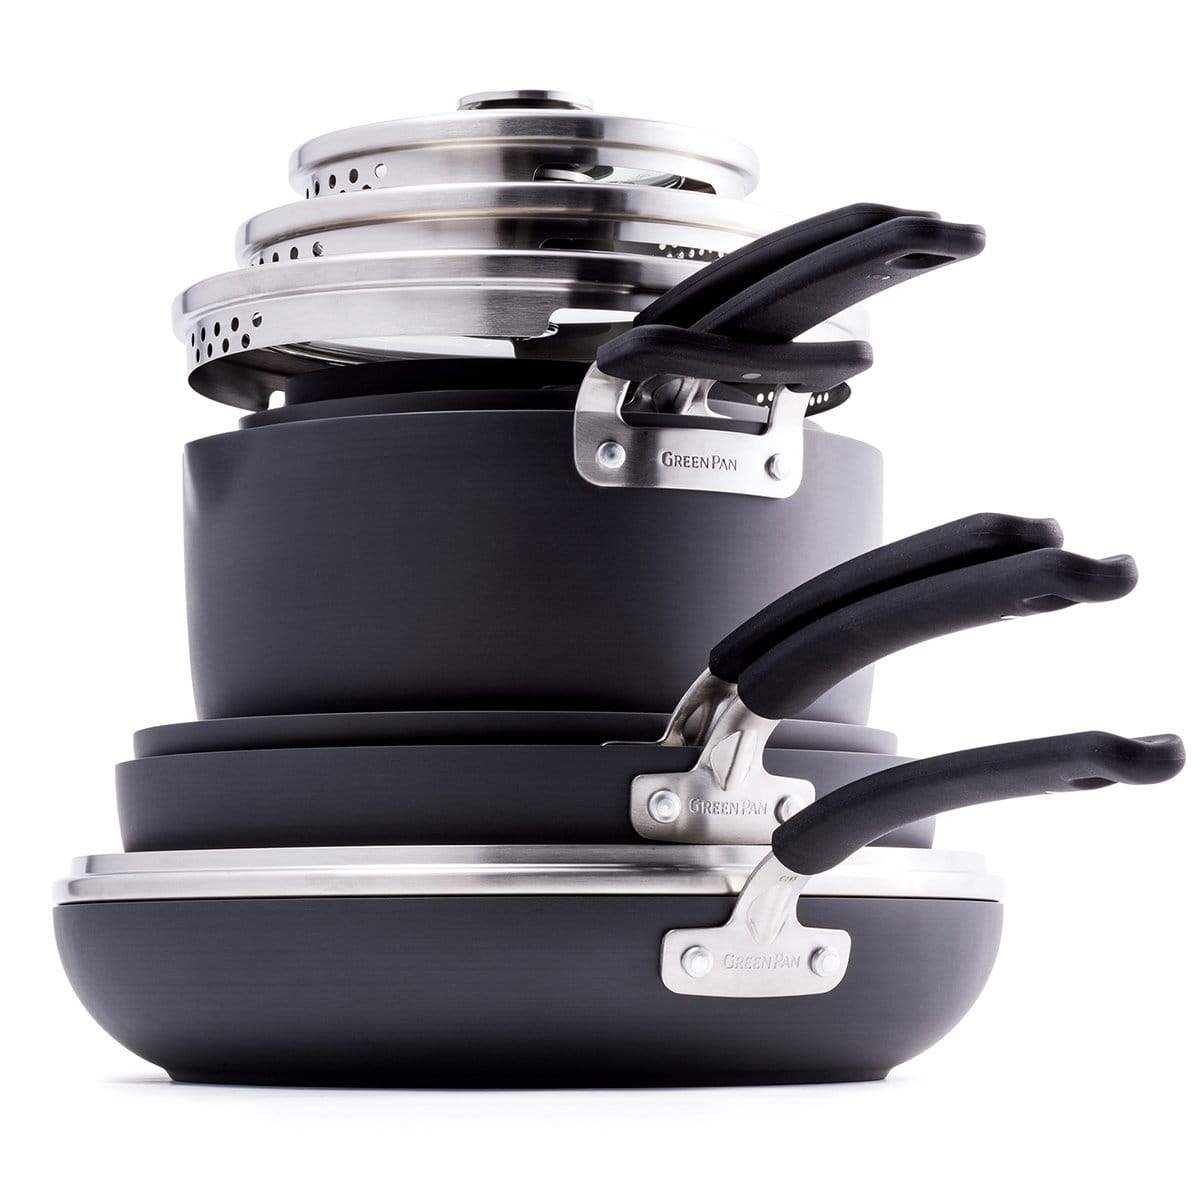 CC002120-001 - Levels 14pc Cookware Sets, Dark Grey - Product Image 3